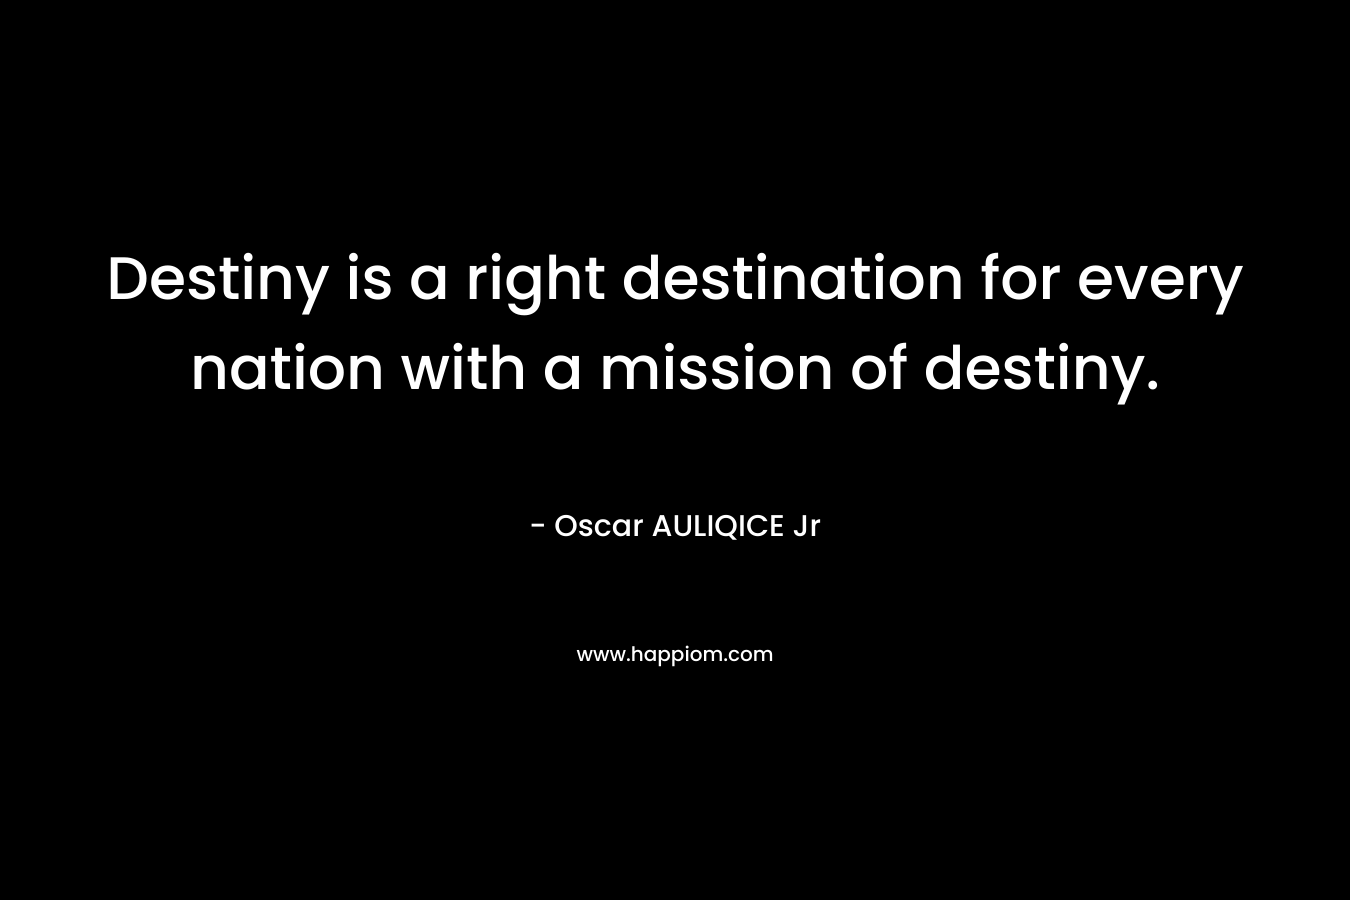 Destiny is a right destination for every nation with a mission of destiny. – Oscar AULIQICE Jr